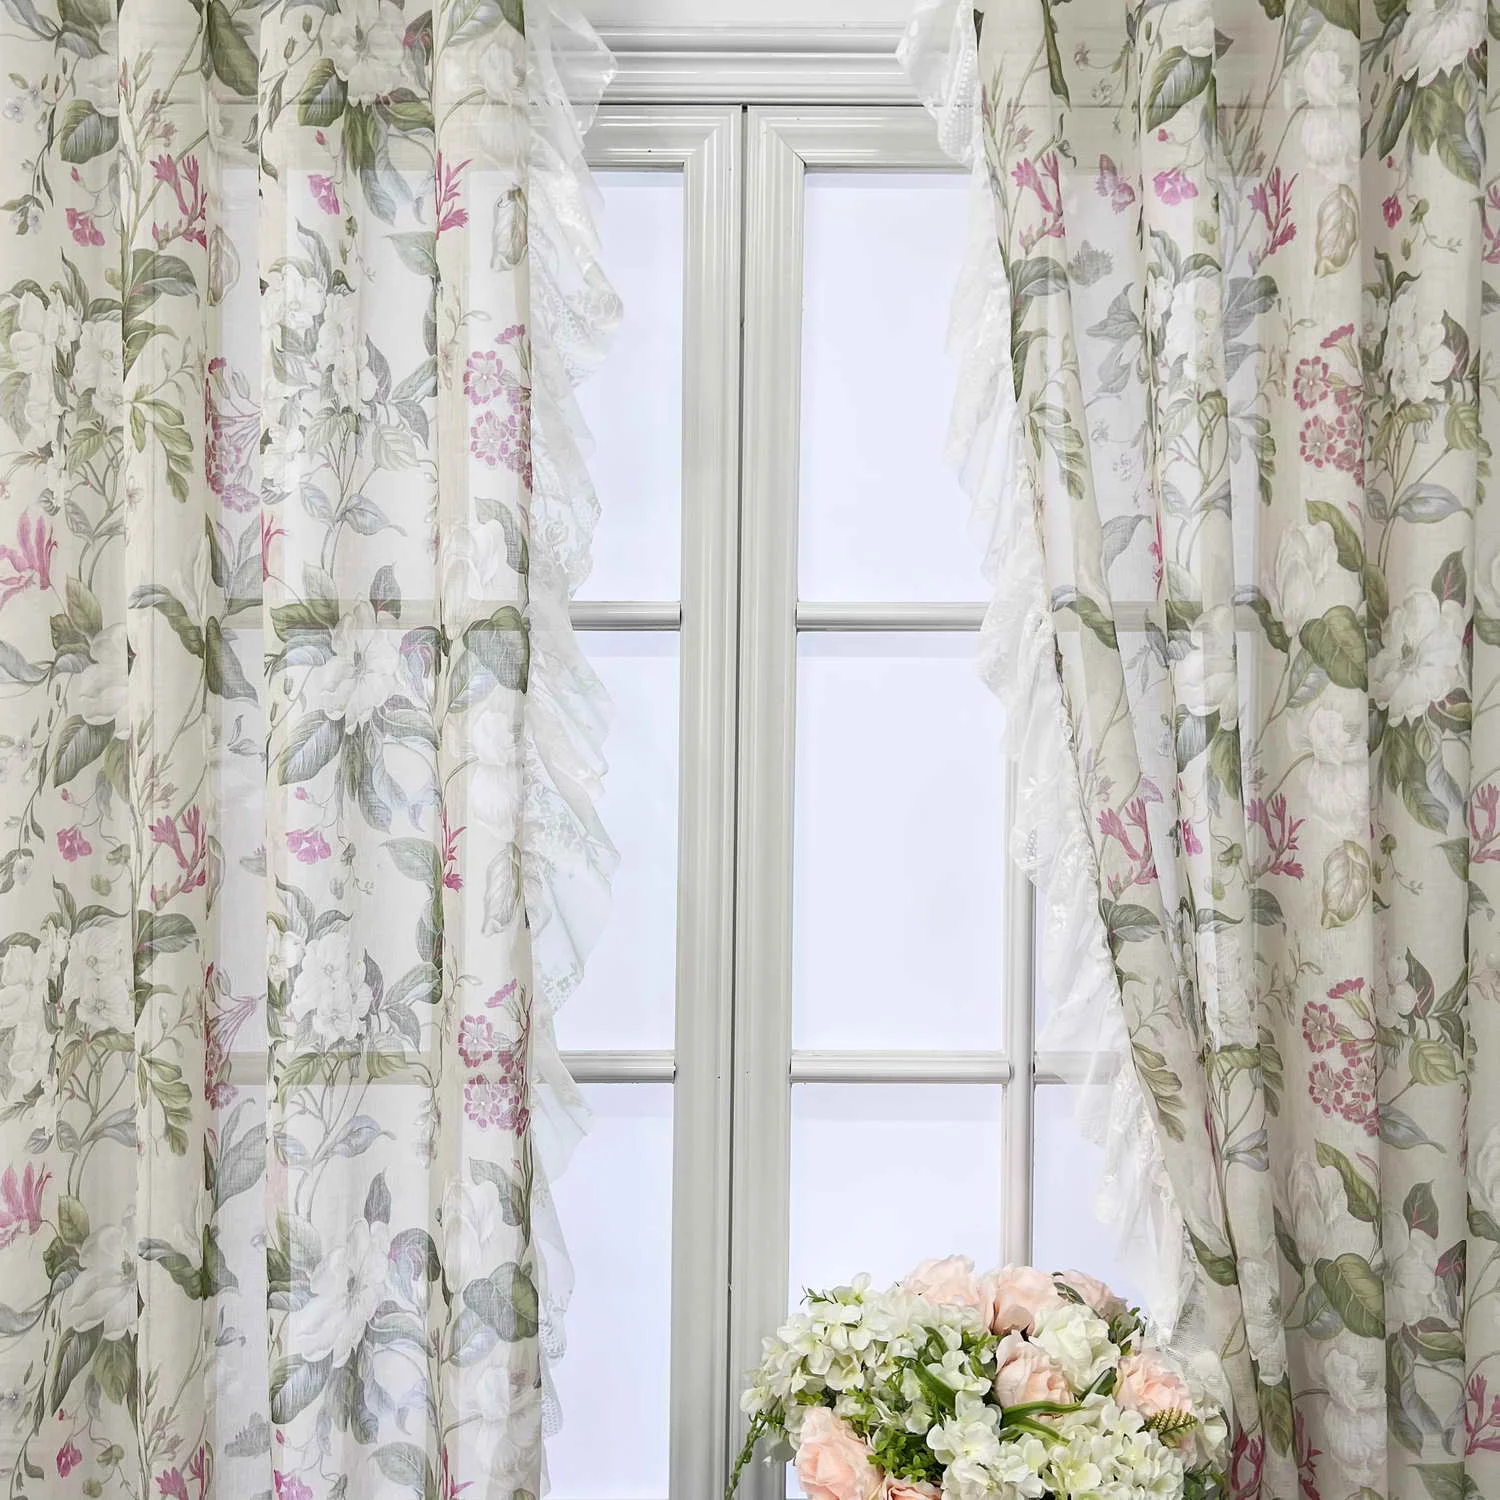 

French Rustic Flower Sheer Tulle Curtains Vintage Ruffle Voile Light Filtering Curtains for Living Room Bedroom Window Drapes